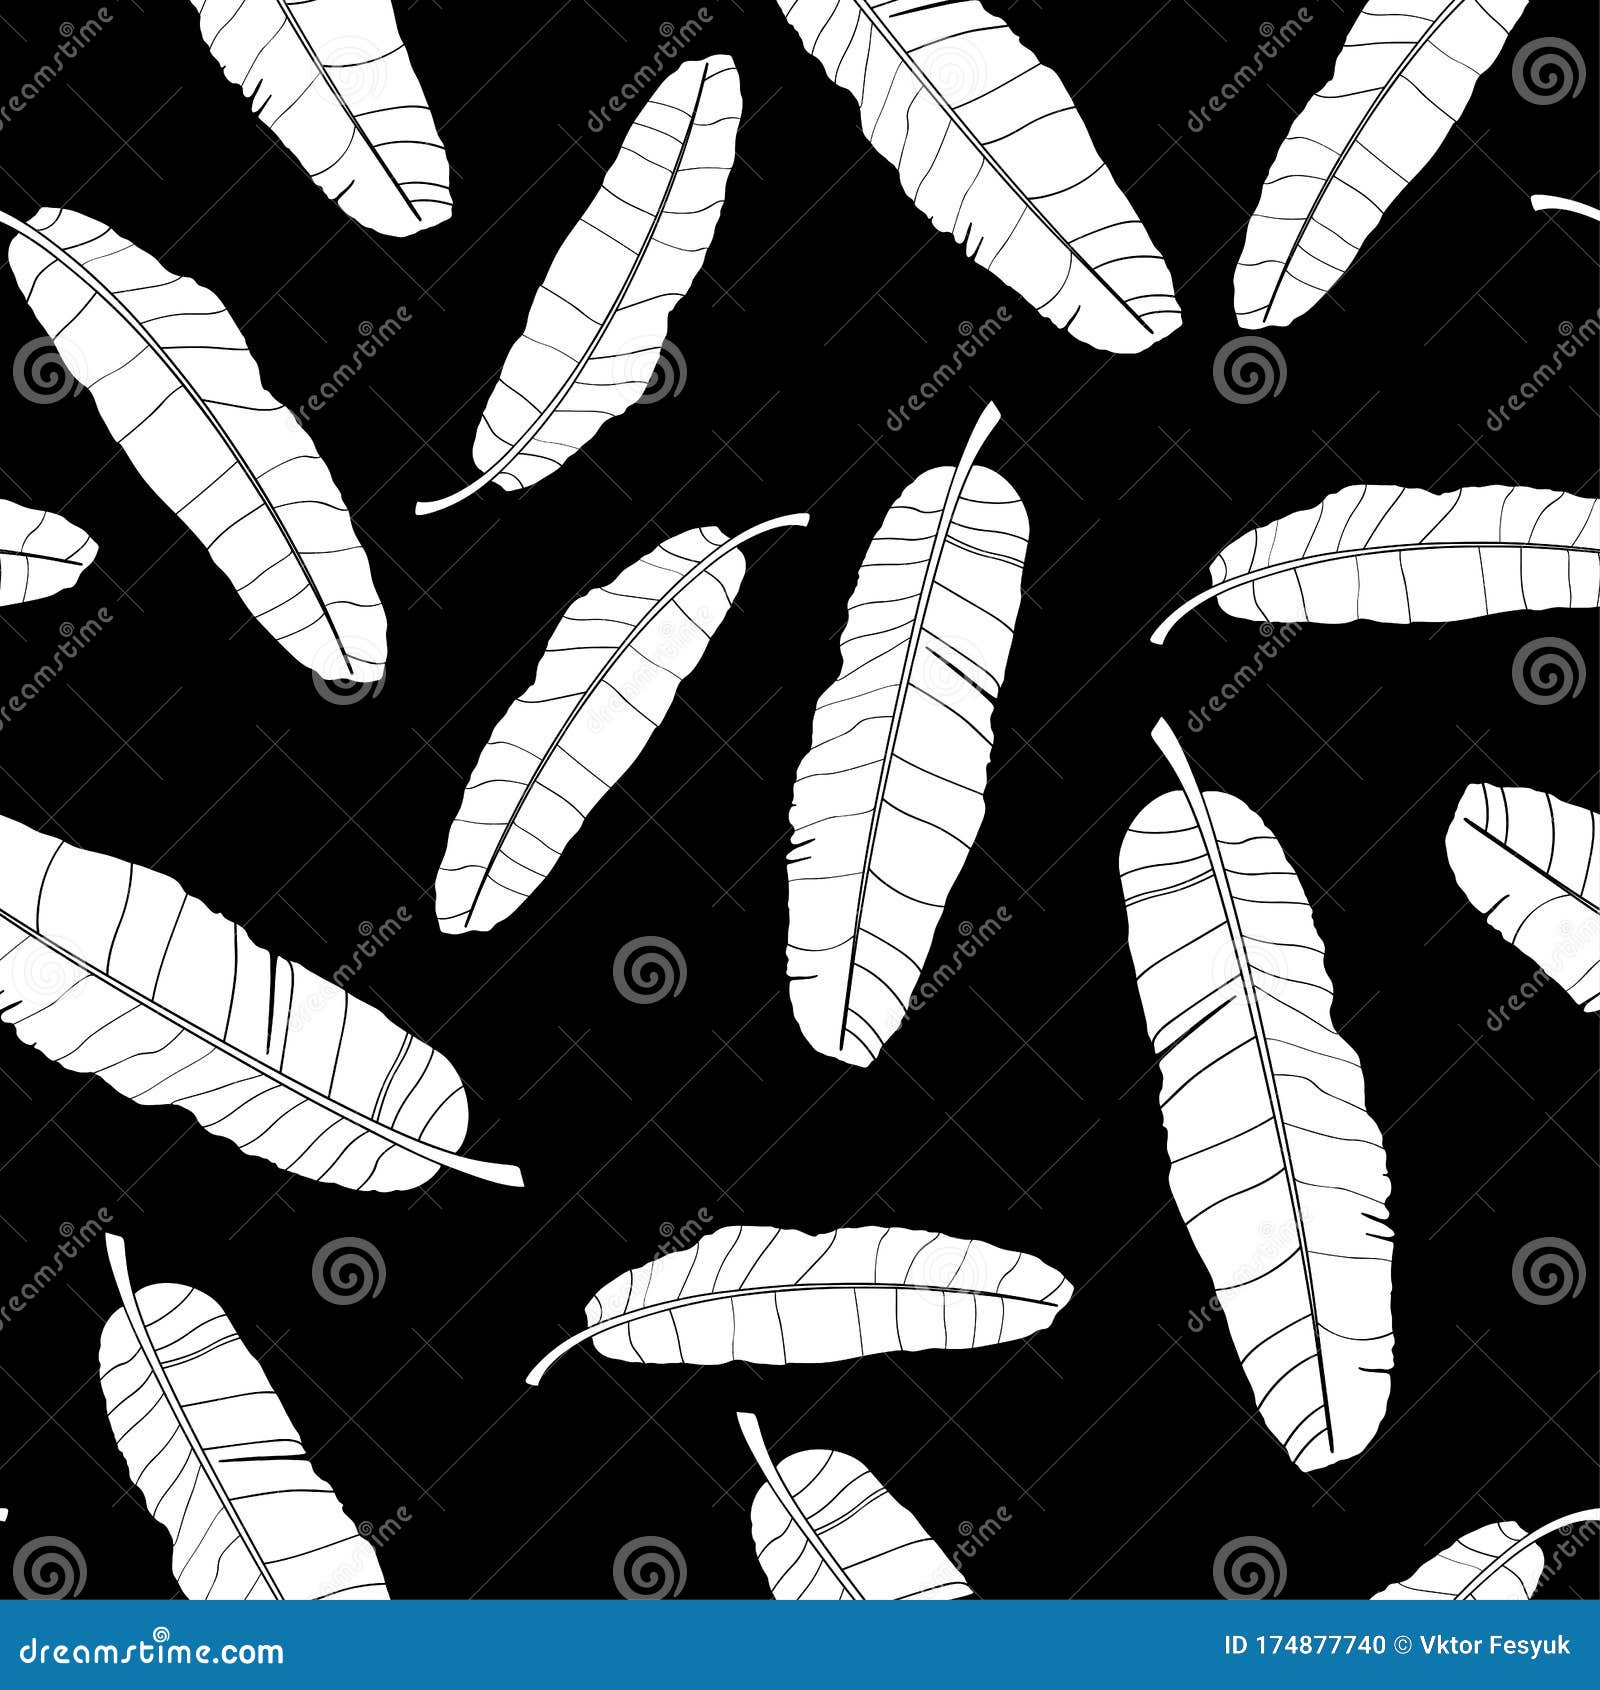 Seamless Banana Leaf Pattern Background. Black And White With Drawing